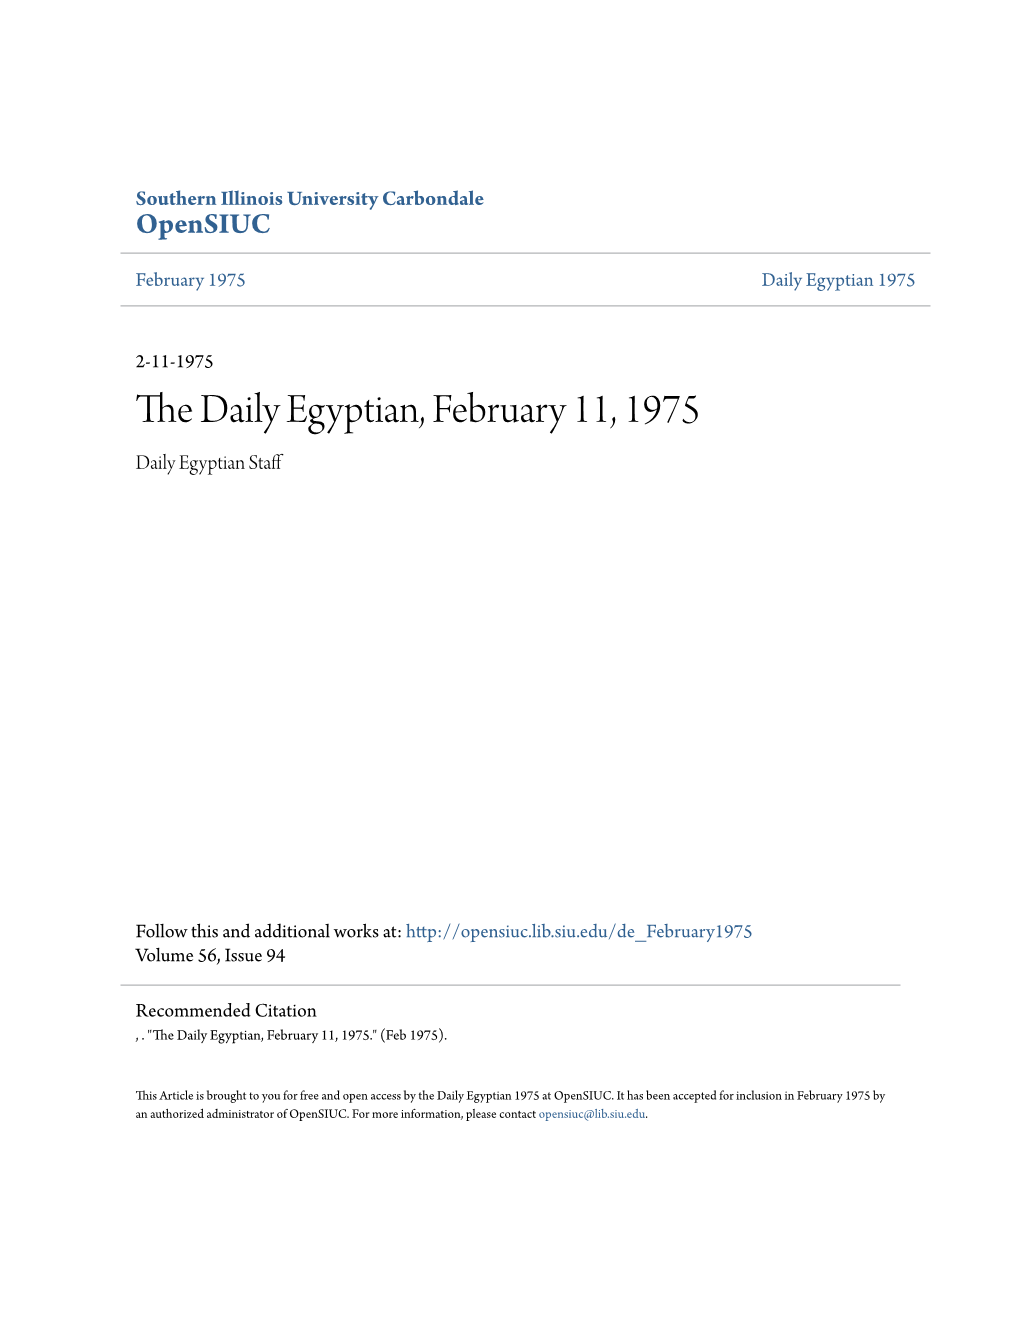 The Daily Egyptian, February 11, 1975